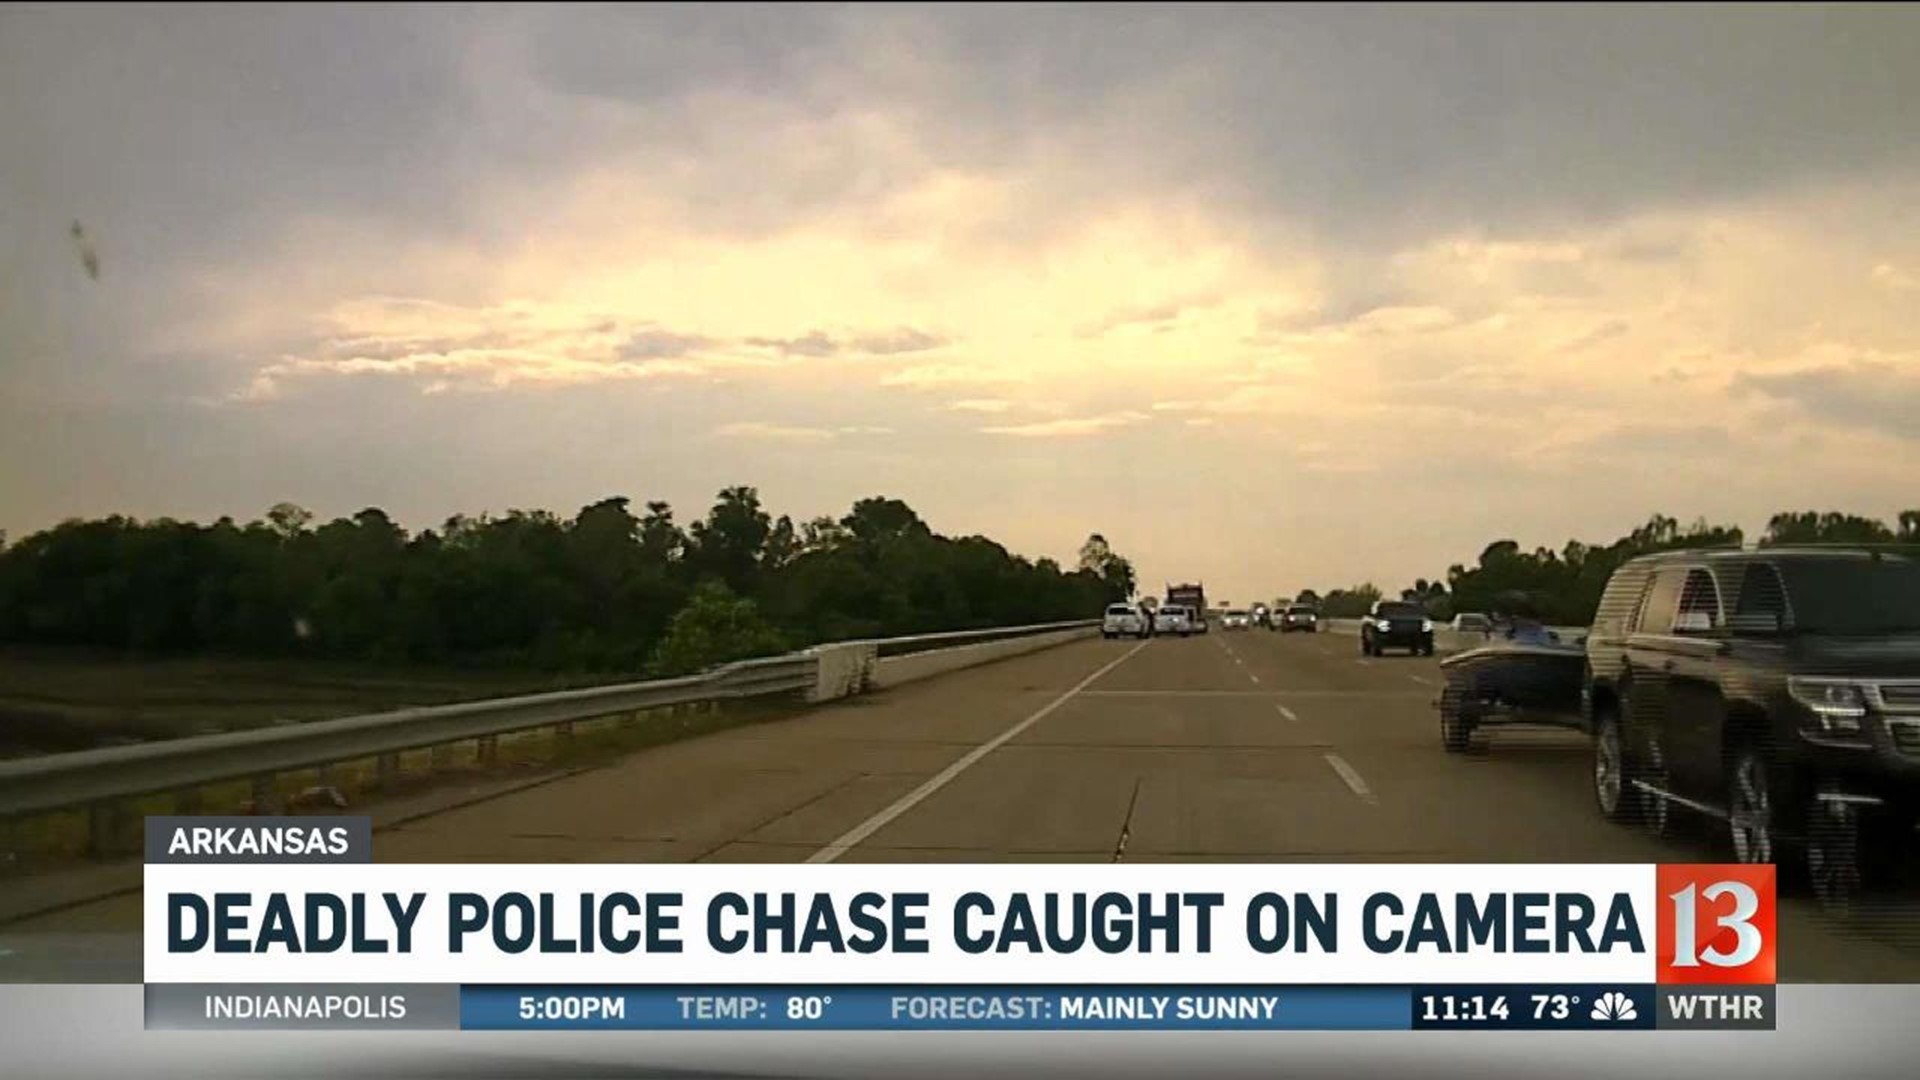 Deadly police chase in Arkansas caught on camera